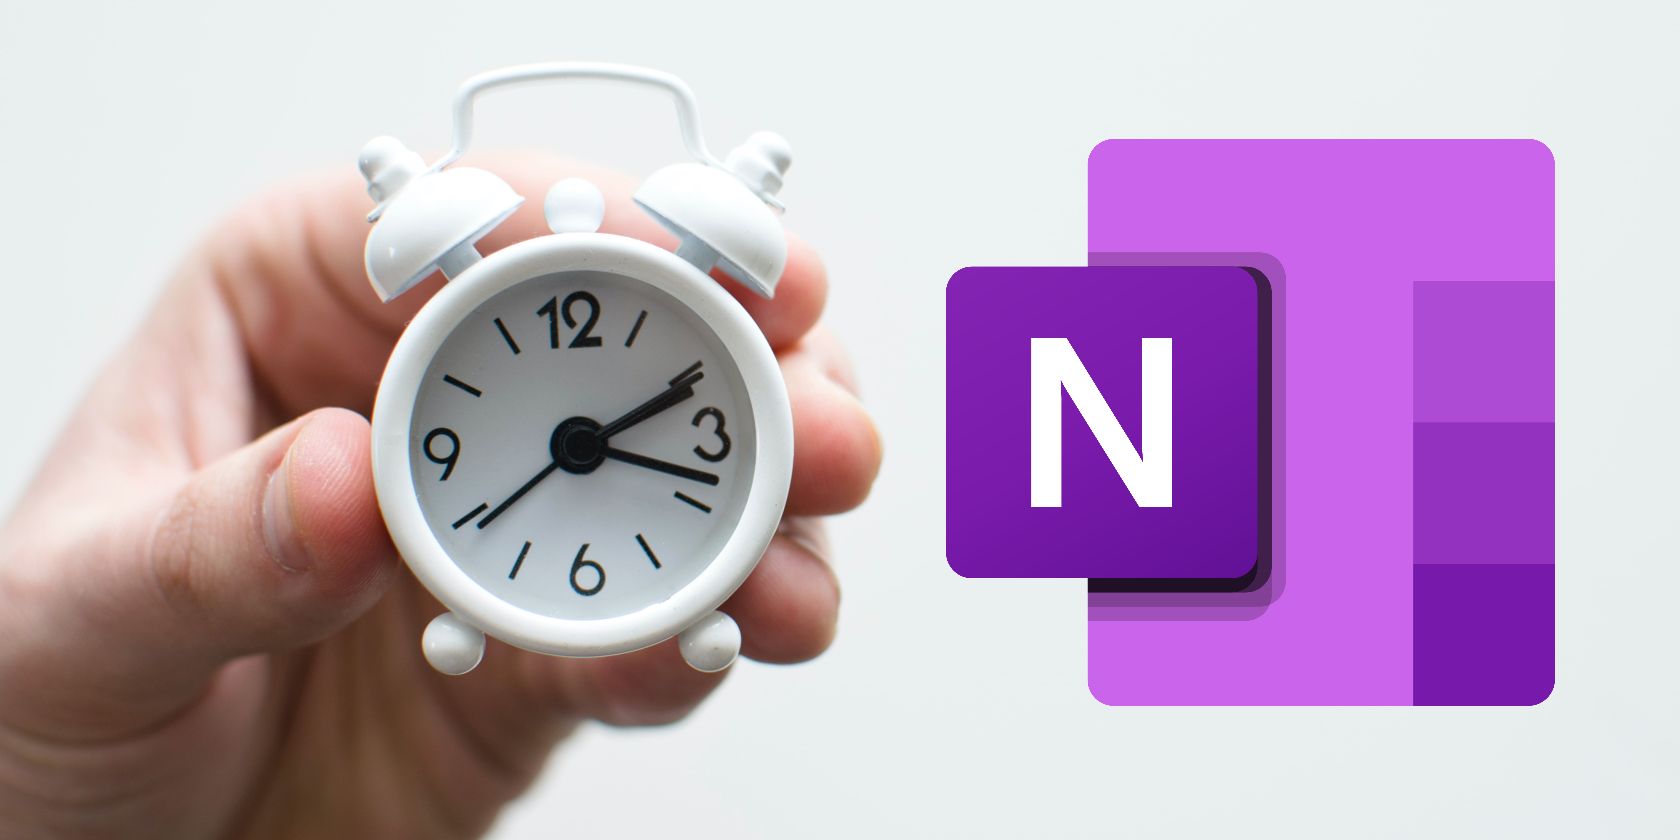 A ticking clock held up next to the OneNote logo